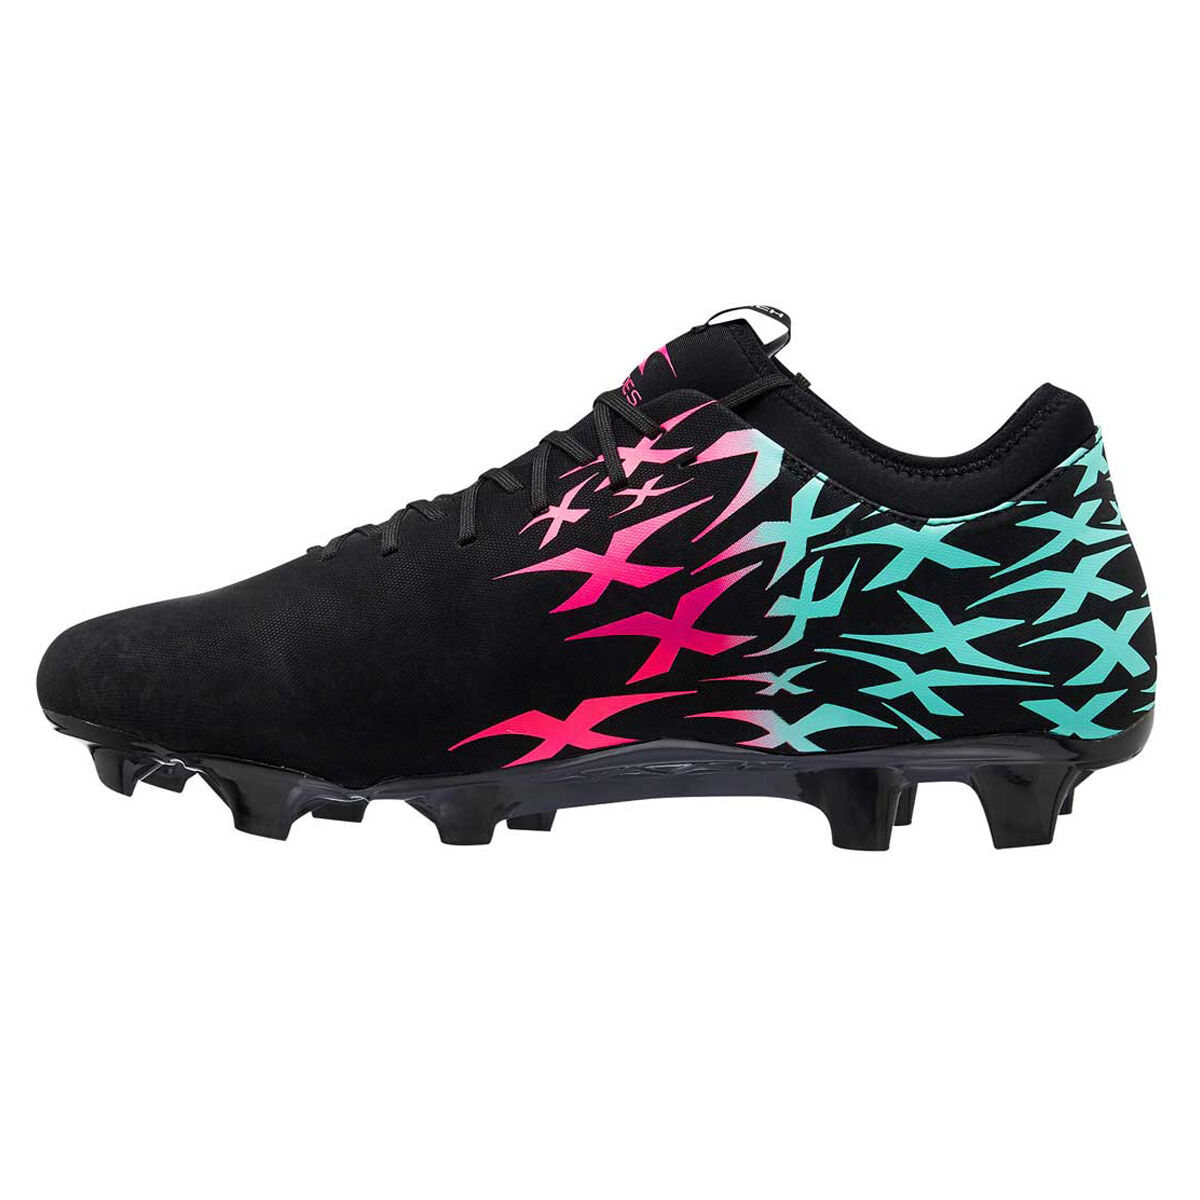 Soccer \u0026 Touch Football Boots 